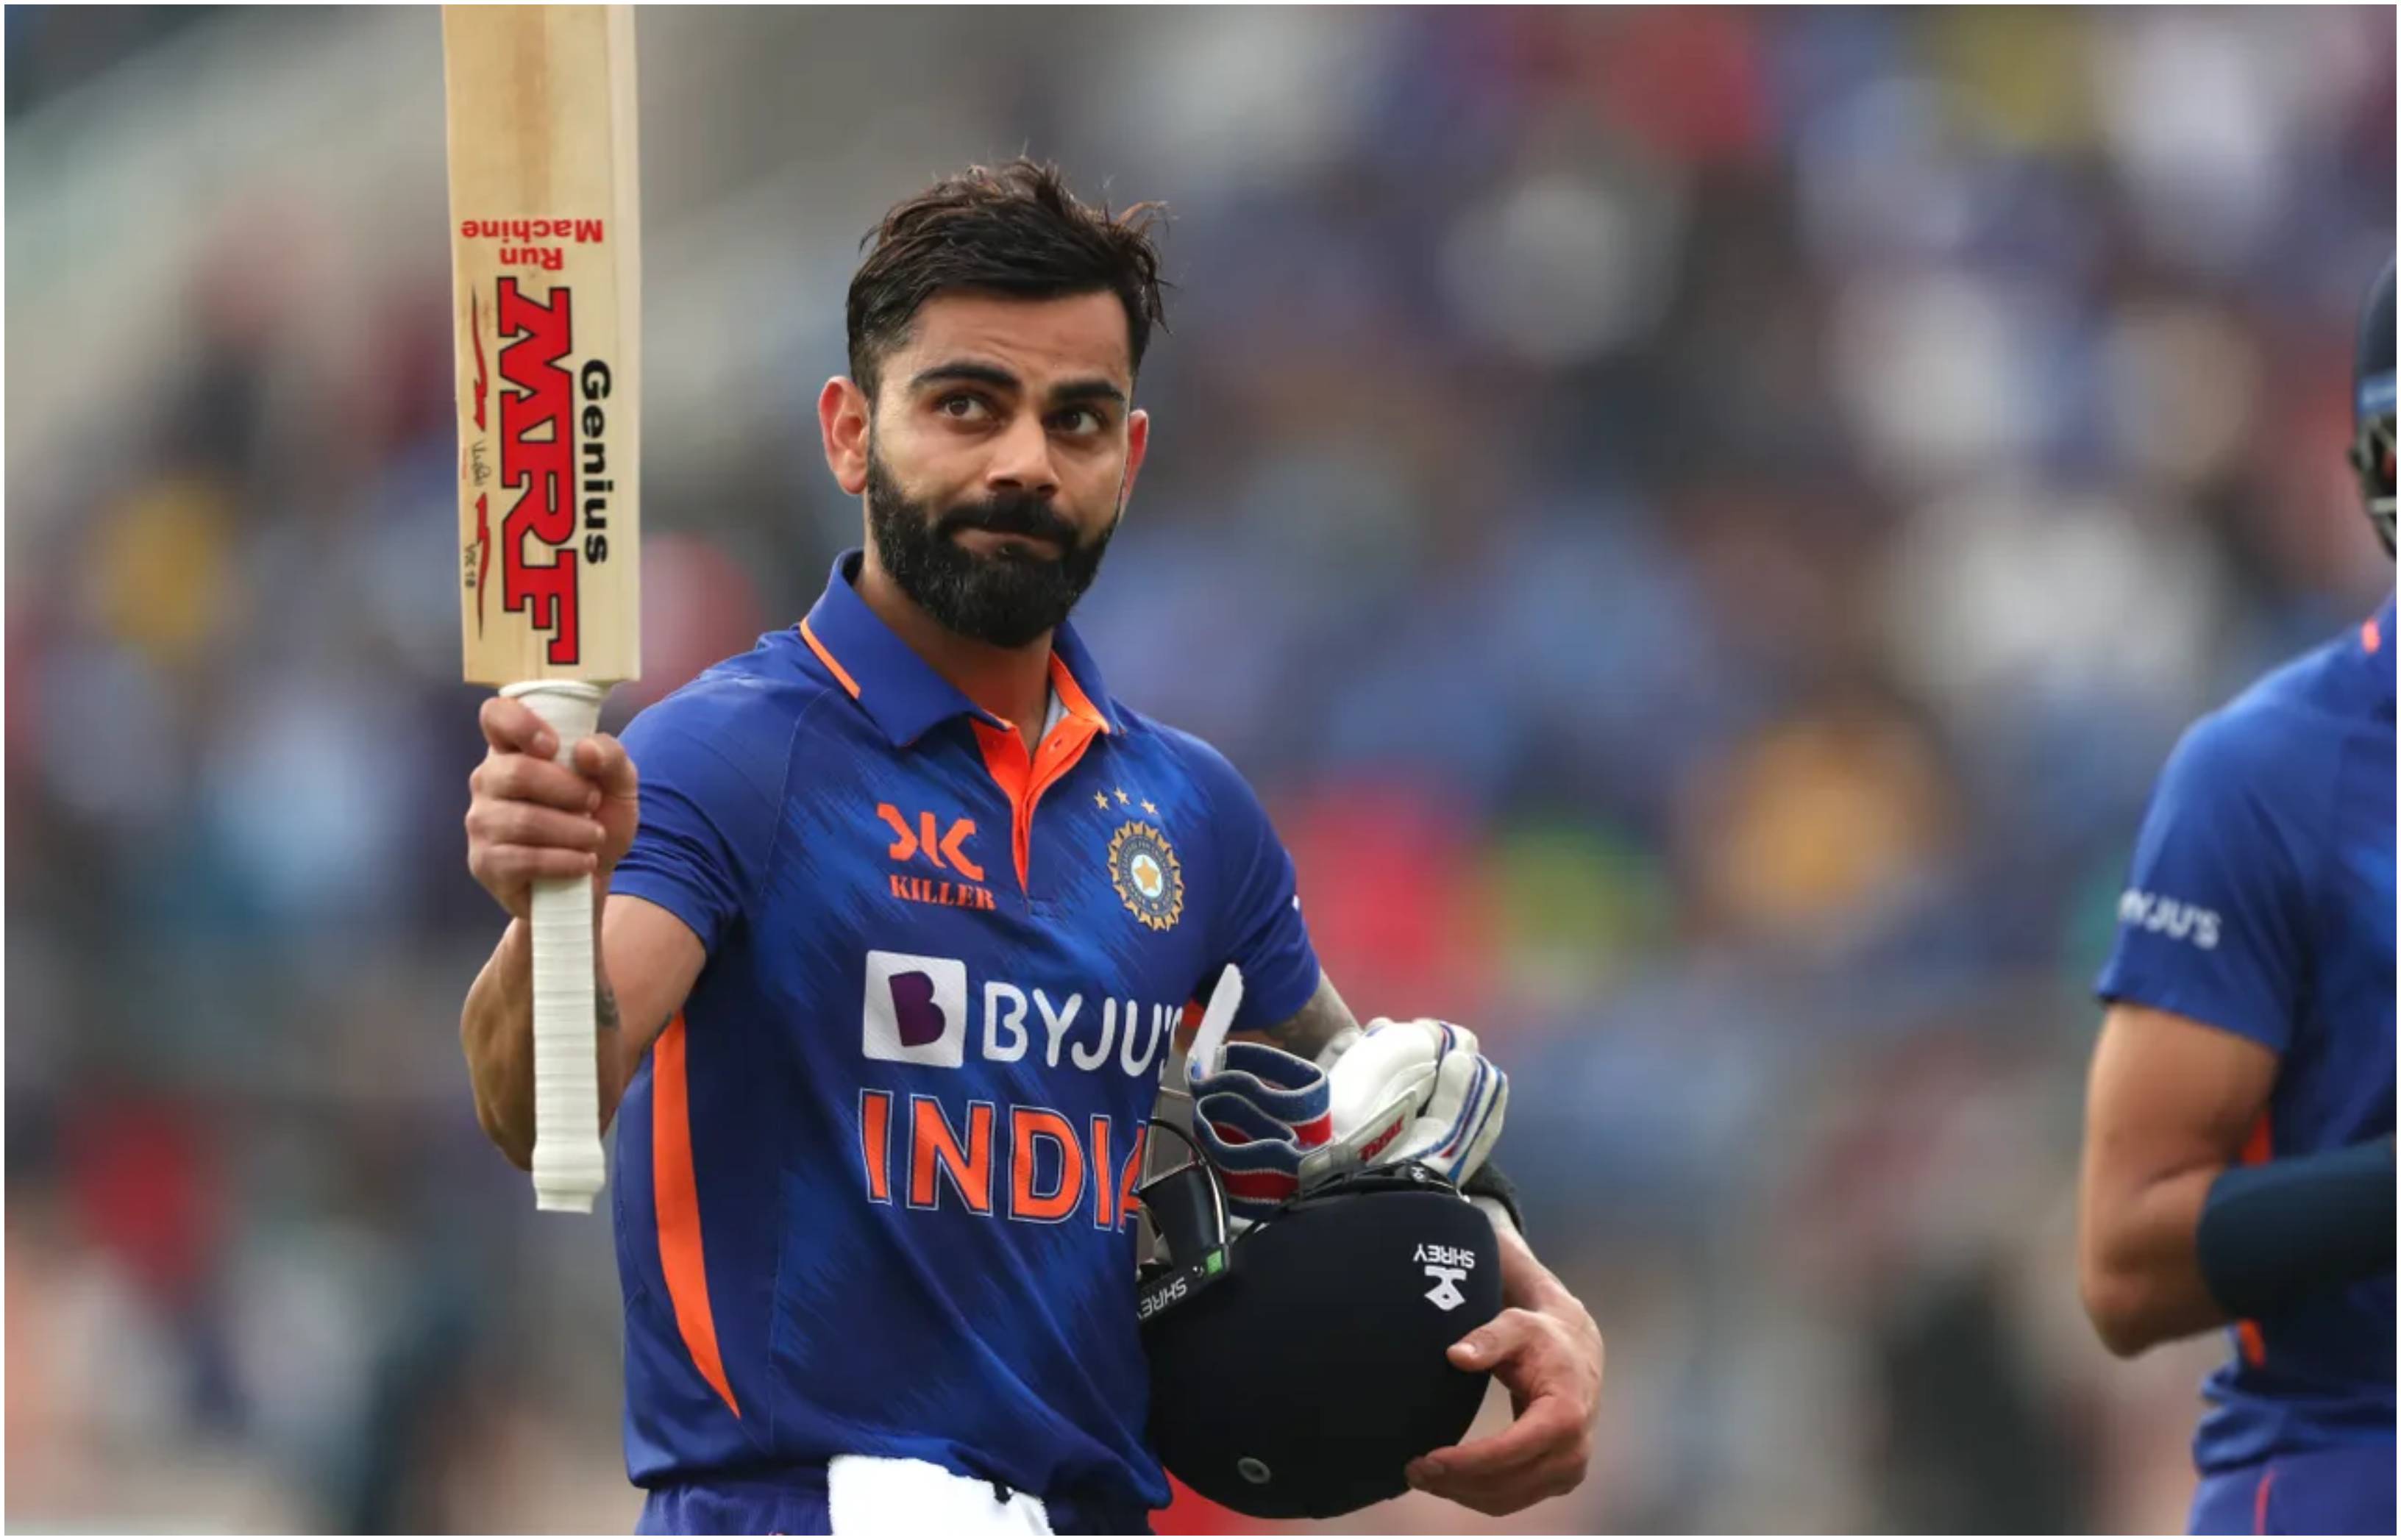 IND v SL 2023: “I am in a nice space right now and want this to continue,”  Virat Kohli after his match-winning ton in 3rd ODI